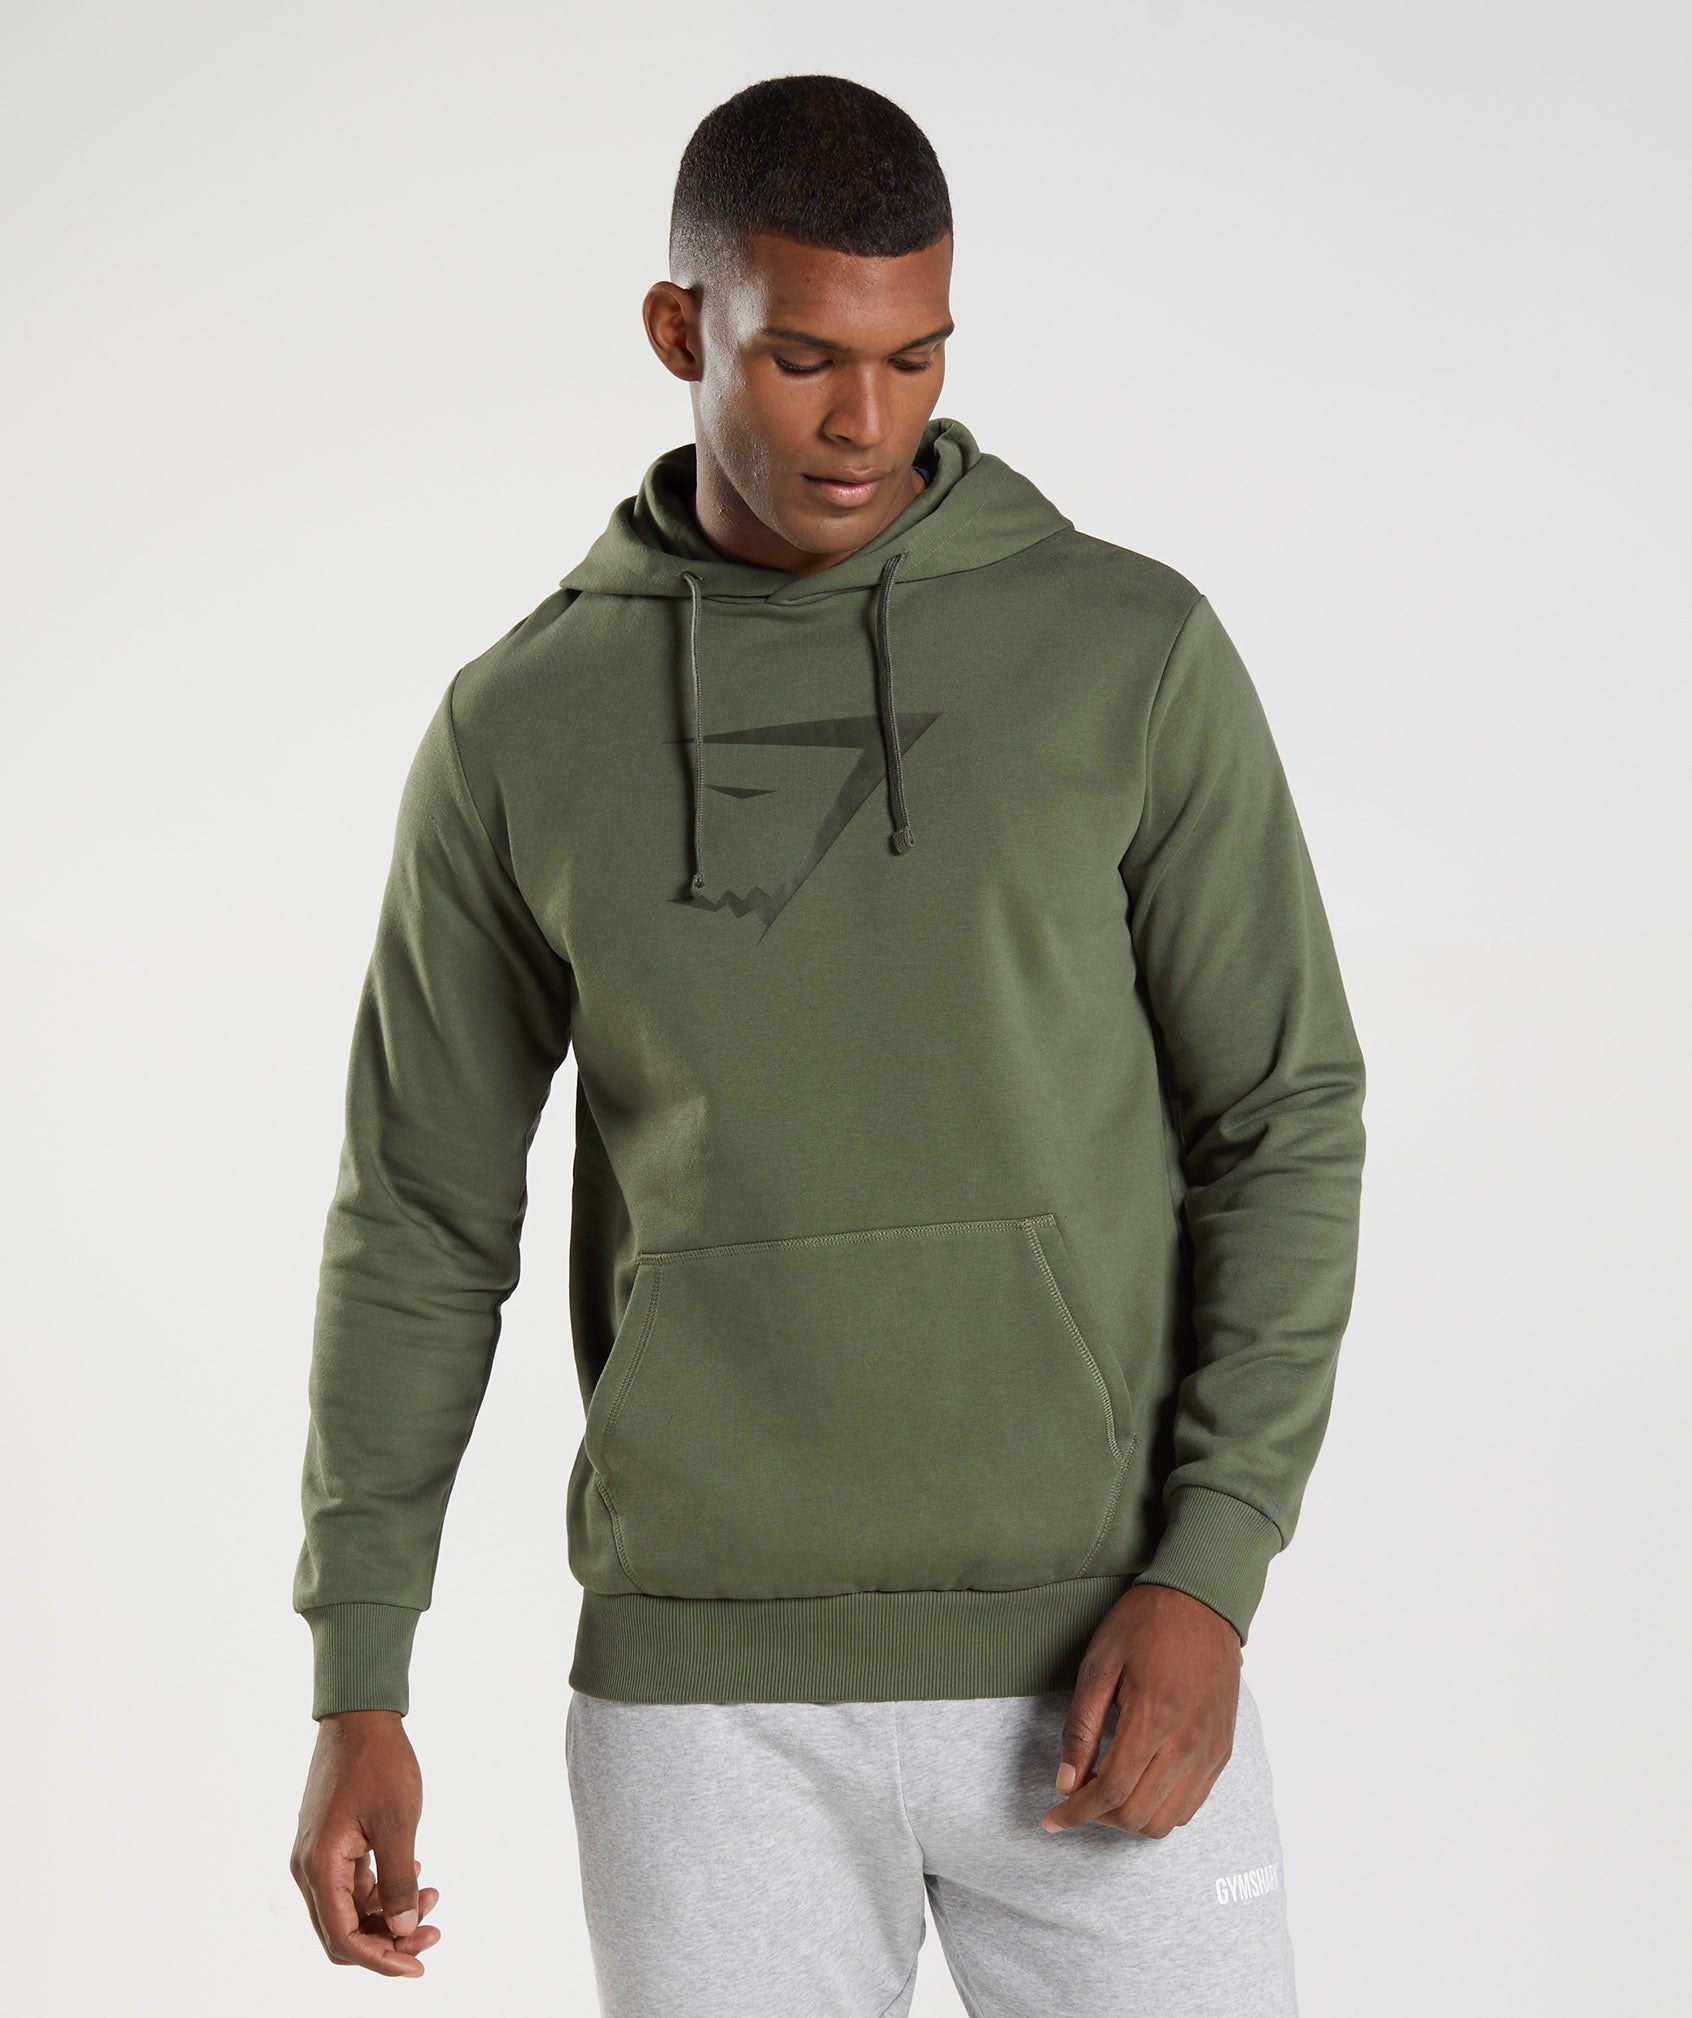 Sharkhead Infill Hoodie in Core Olive - view 1